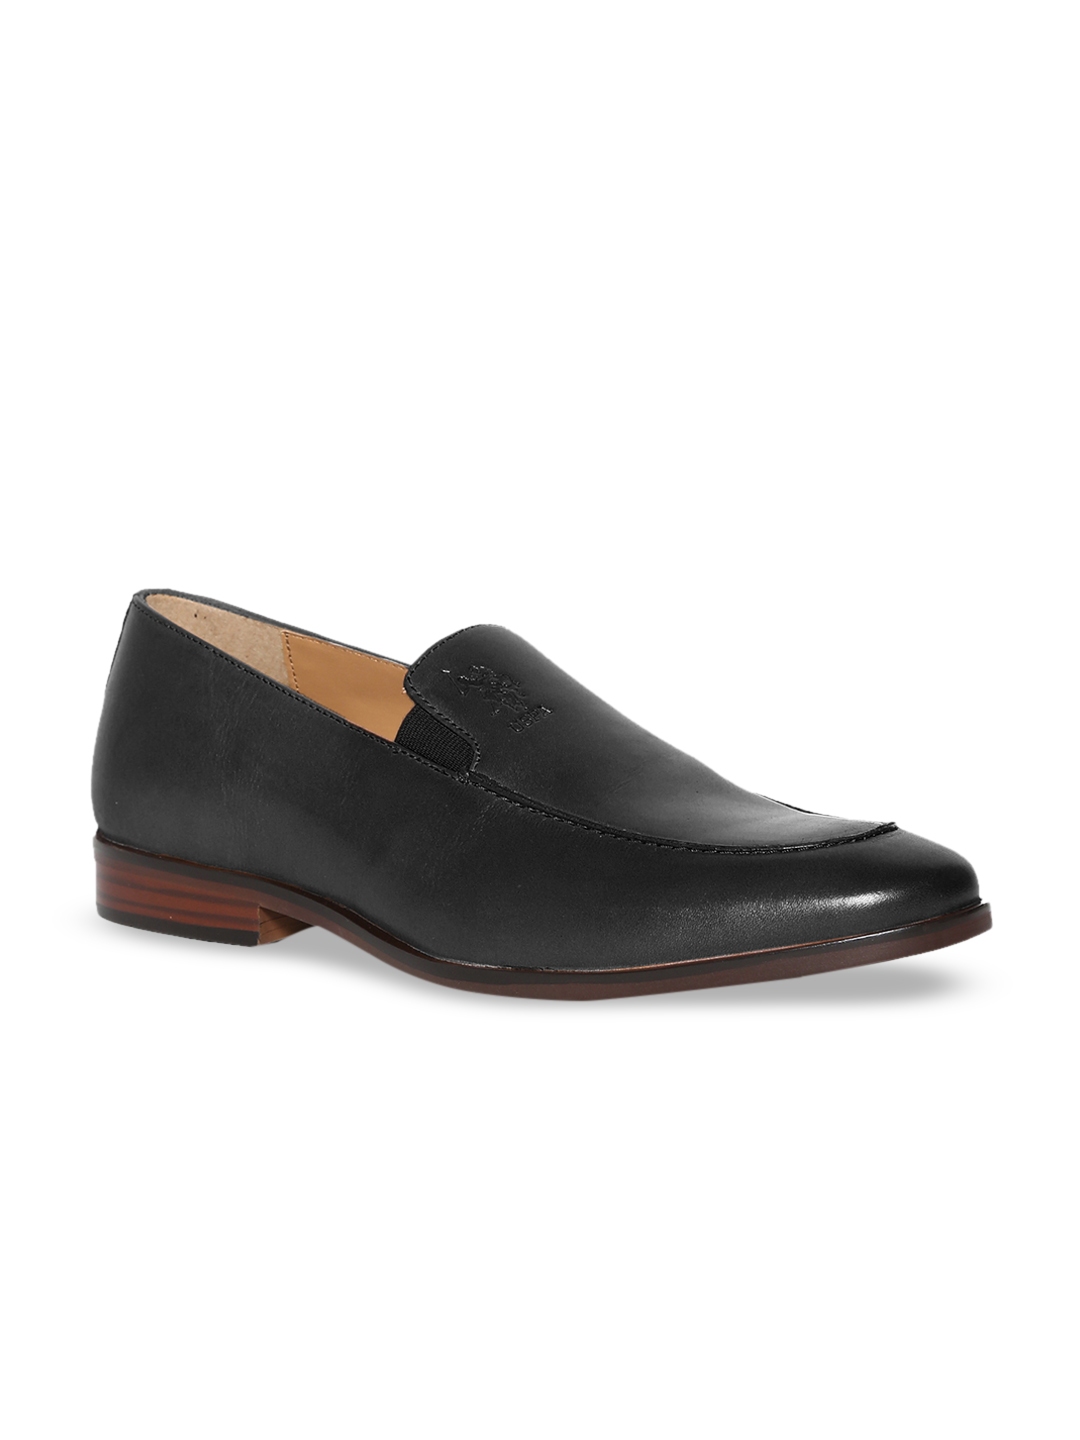 Buy U.S. Polo Assn. Men Black Solid Leather Formal Loafers - Casual Shoes for Men 11149246 | Myntra